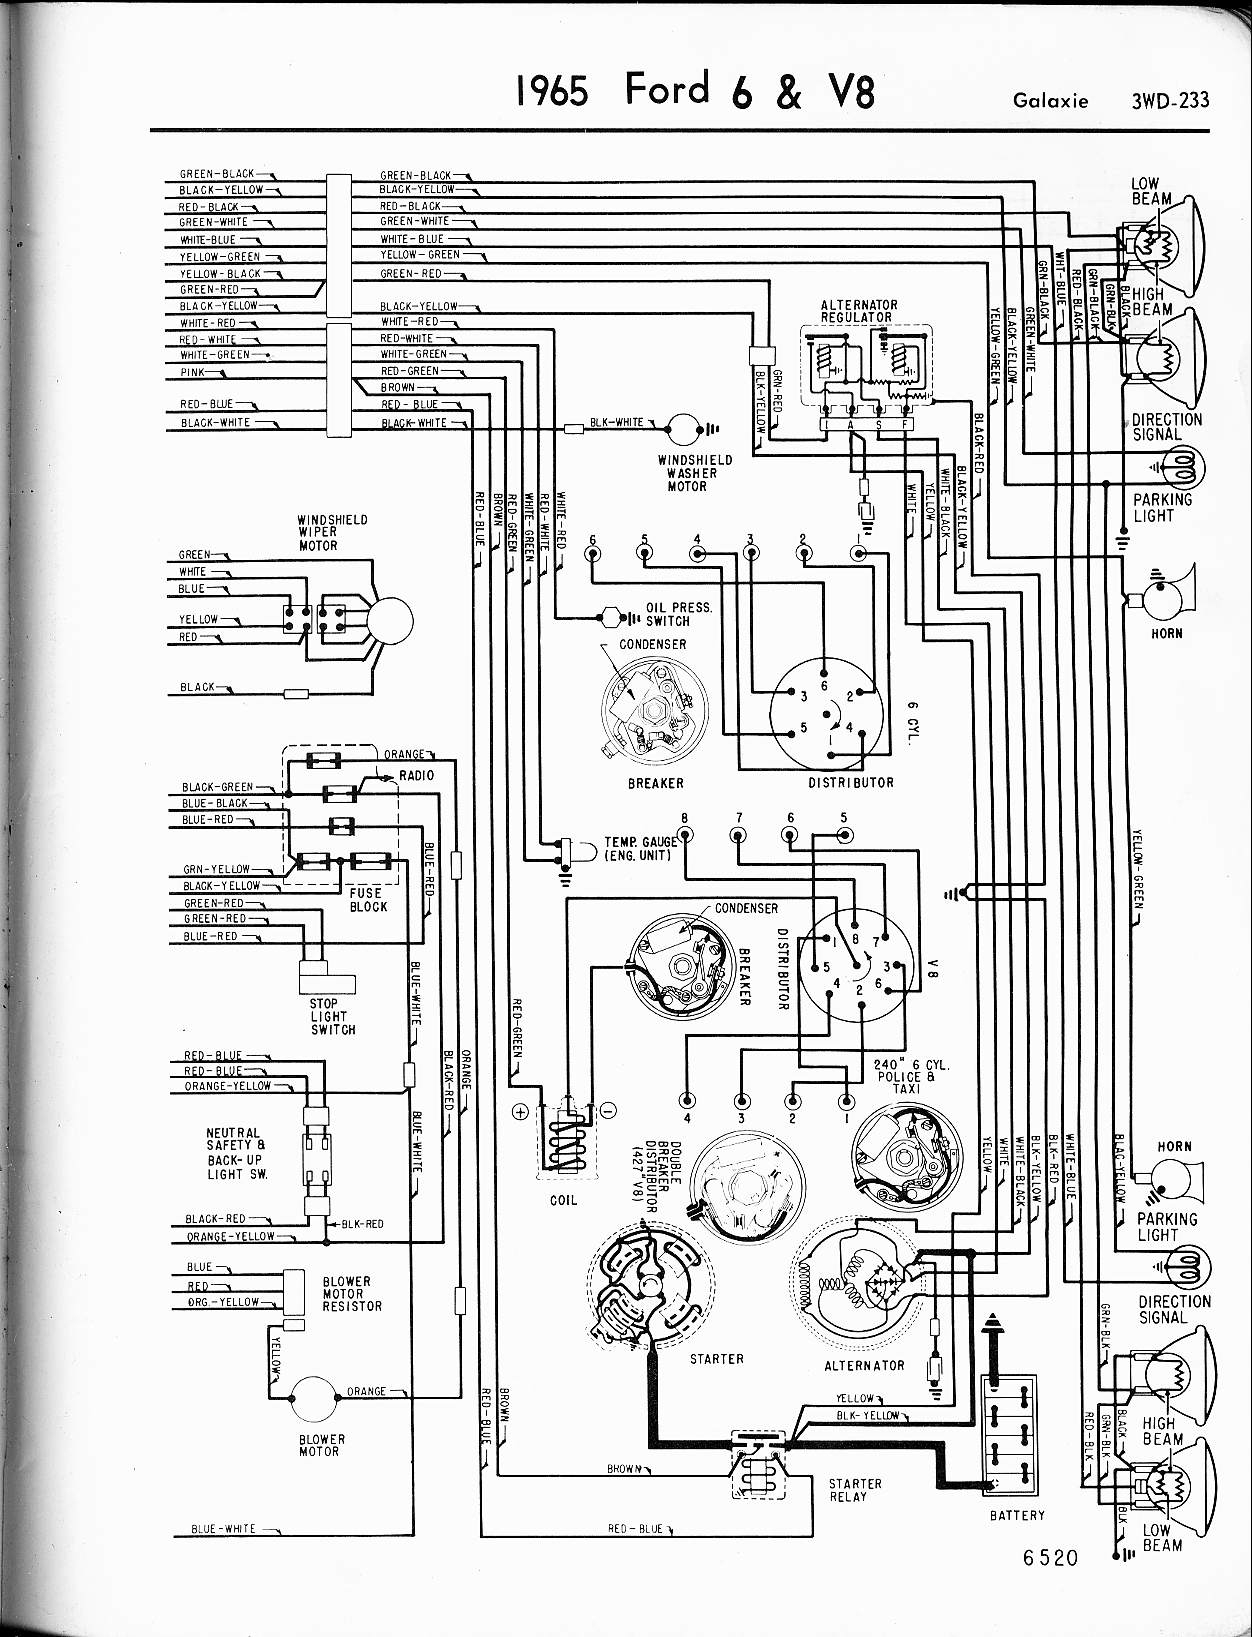 Ford Wiring | Manual E-Books - Ford Wiring Diagram